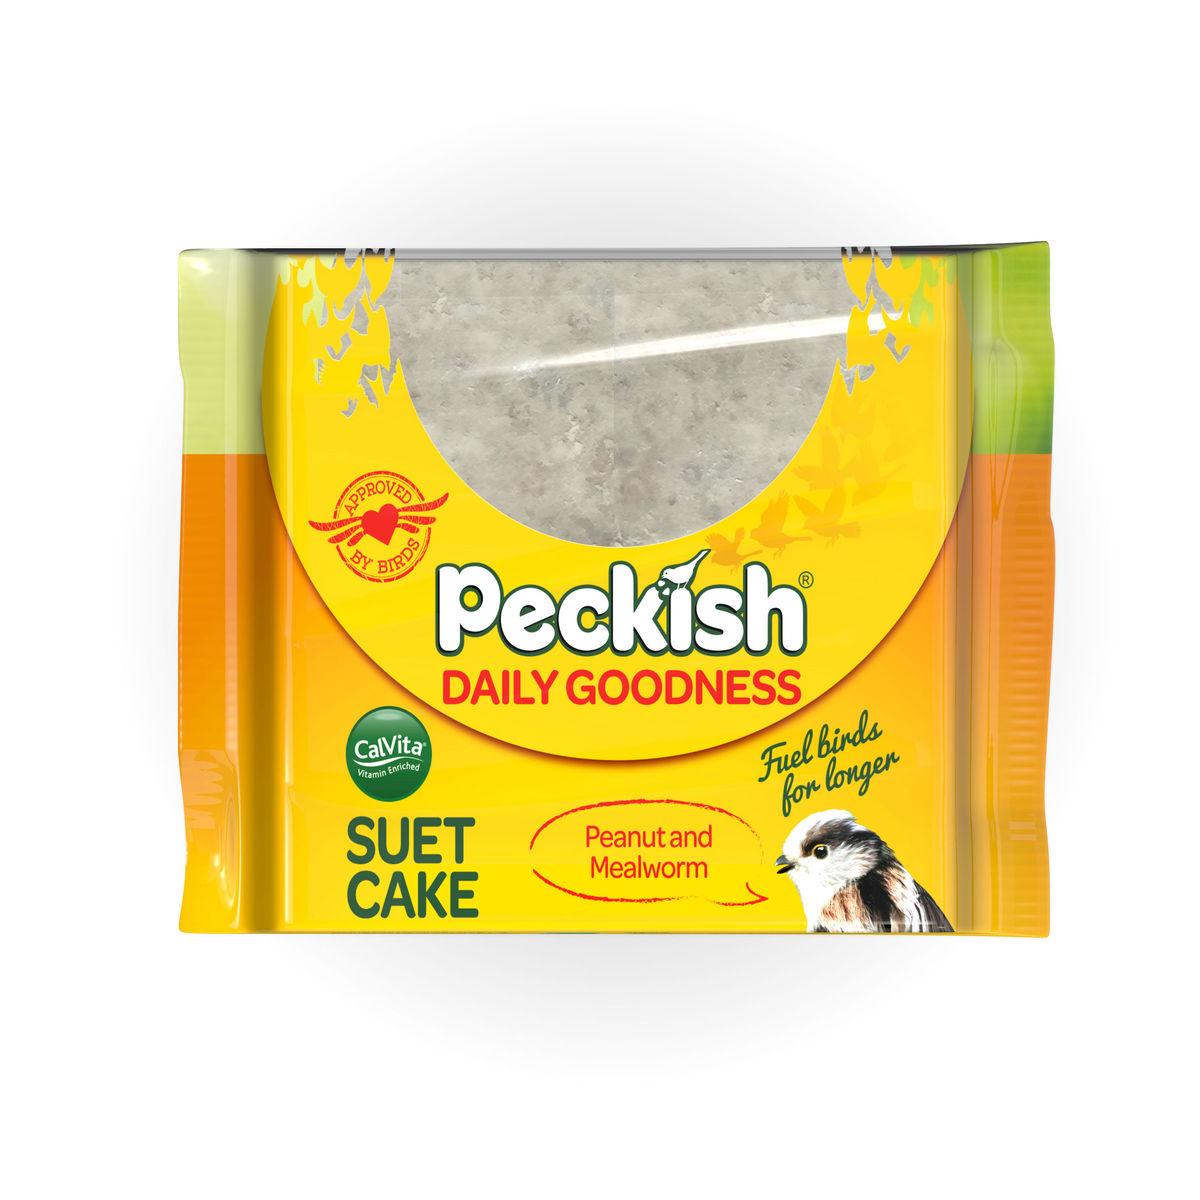 PK Daily Goodness Mealworm Suet Cake 300g - The Pavilion